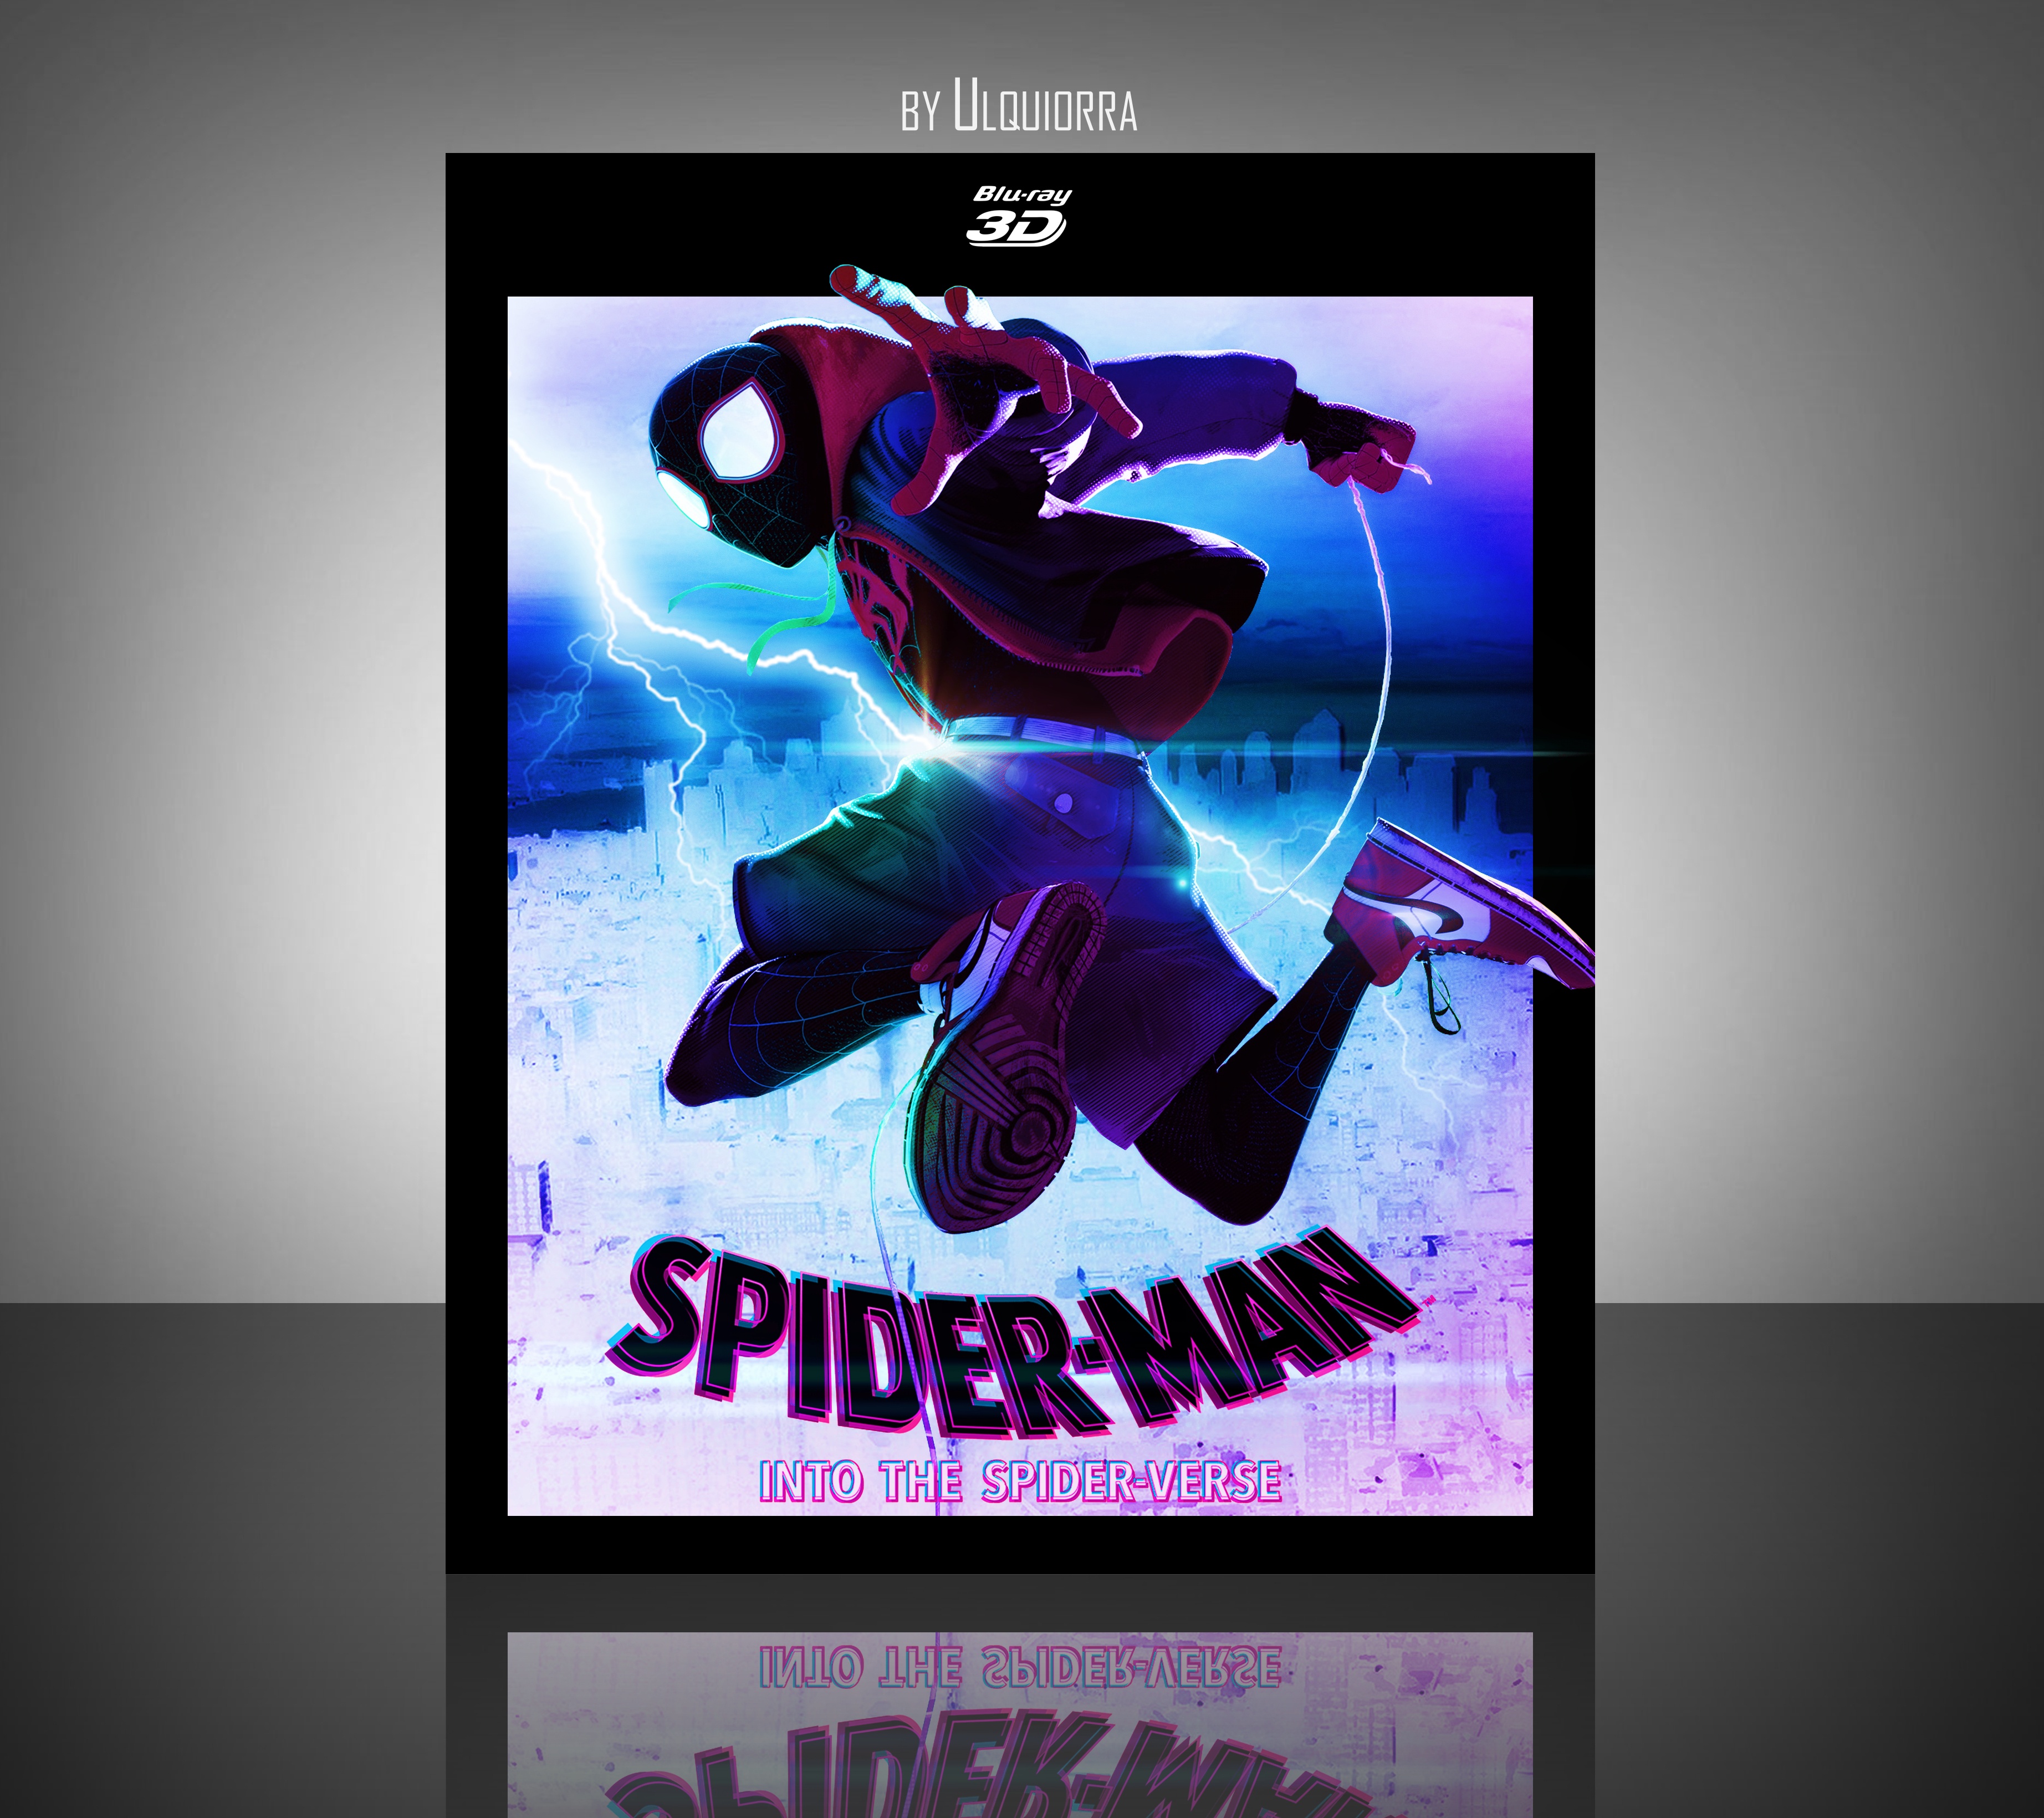 Spider-Man into the Spider-Verse box cover